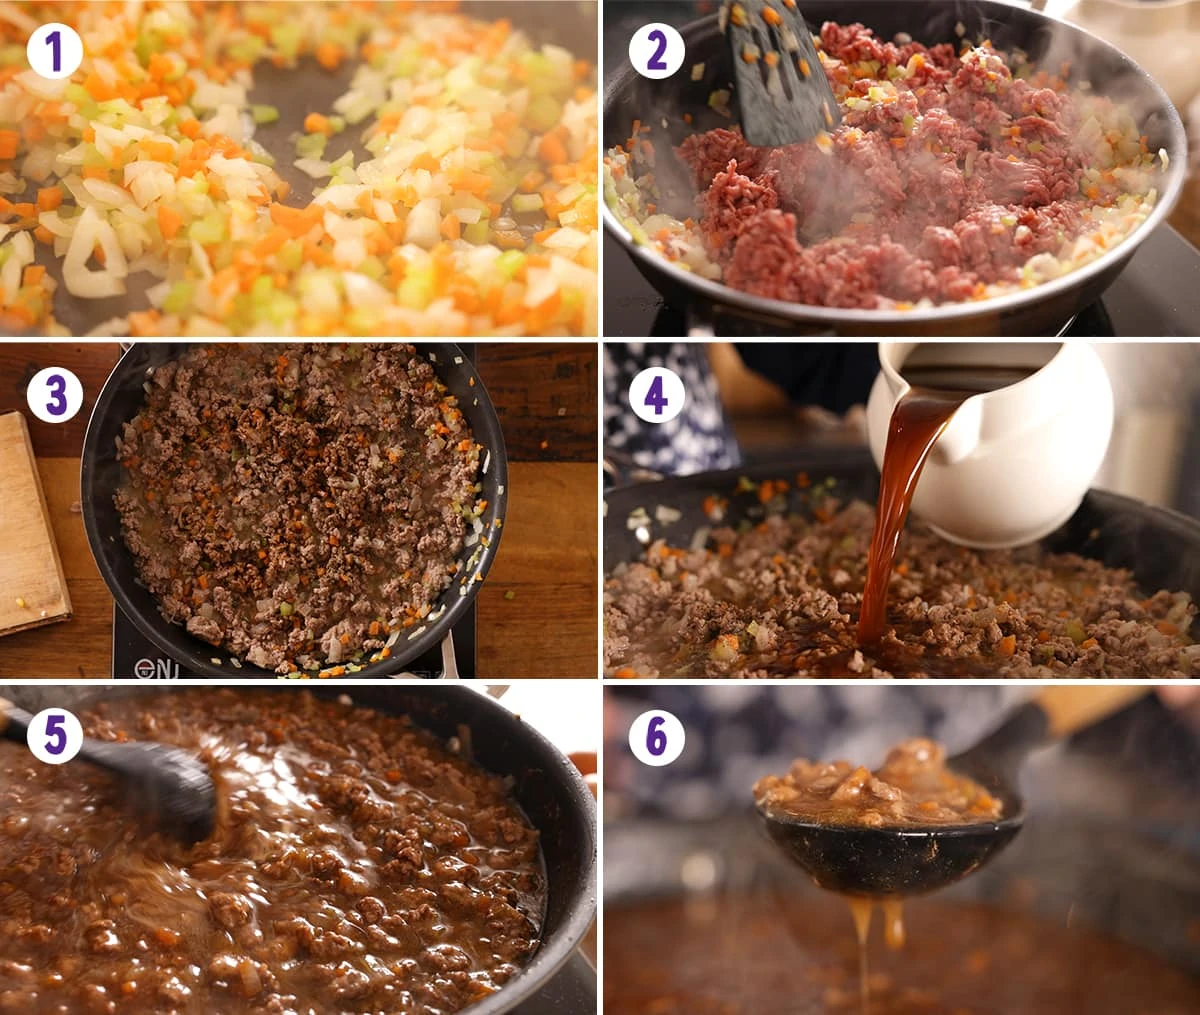 6 image collage showing initial steps for making Shepherd's pie